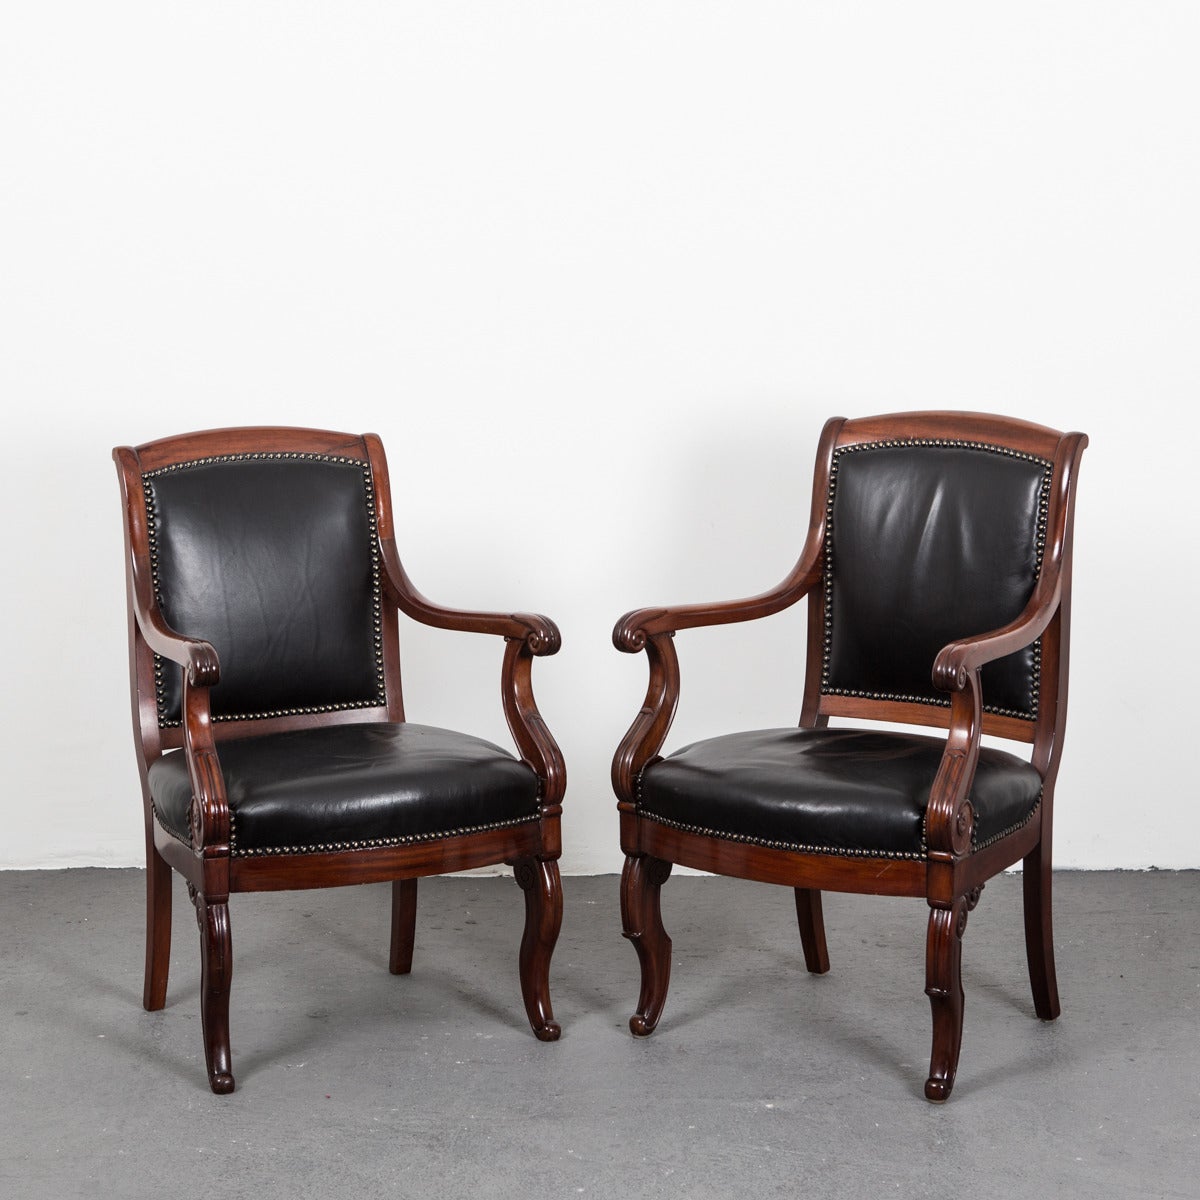 Armchairs pair French Directoire mahogany black leather France. A pair of French Directoire armchairs made in France during 1790-1810. Frame made in a beautifully patinated mahogany. Seat and back upholstered in a soft black leather.